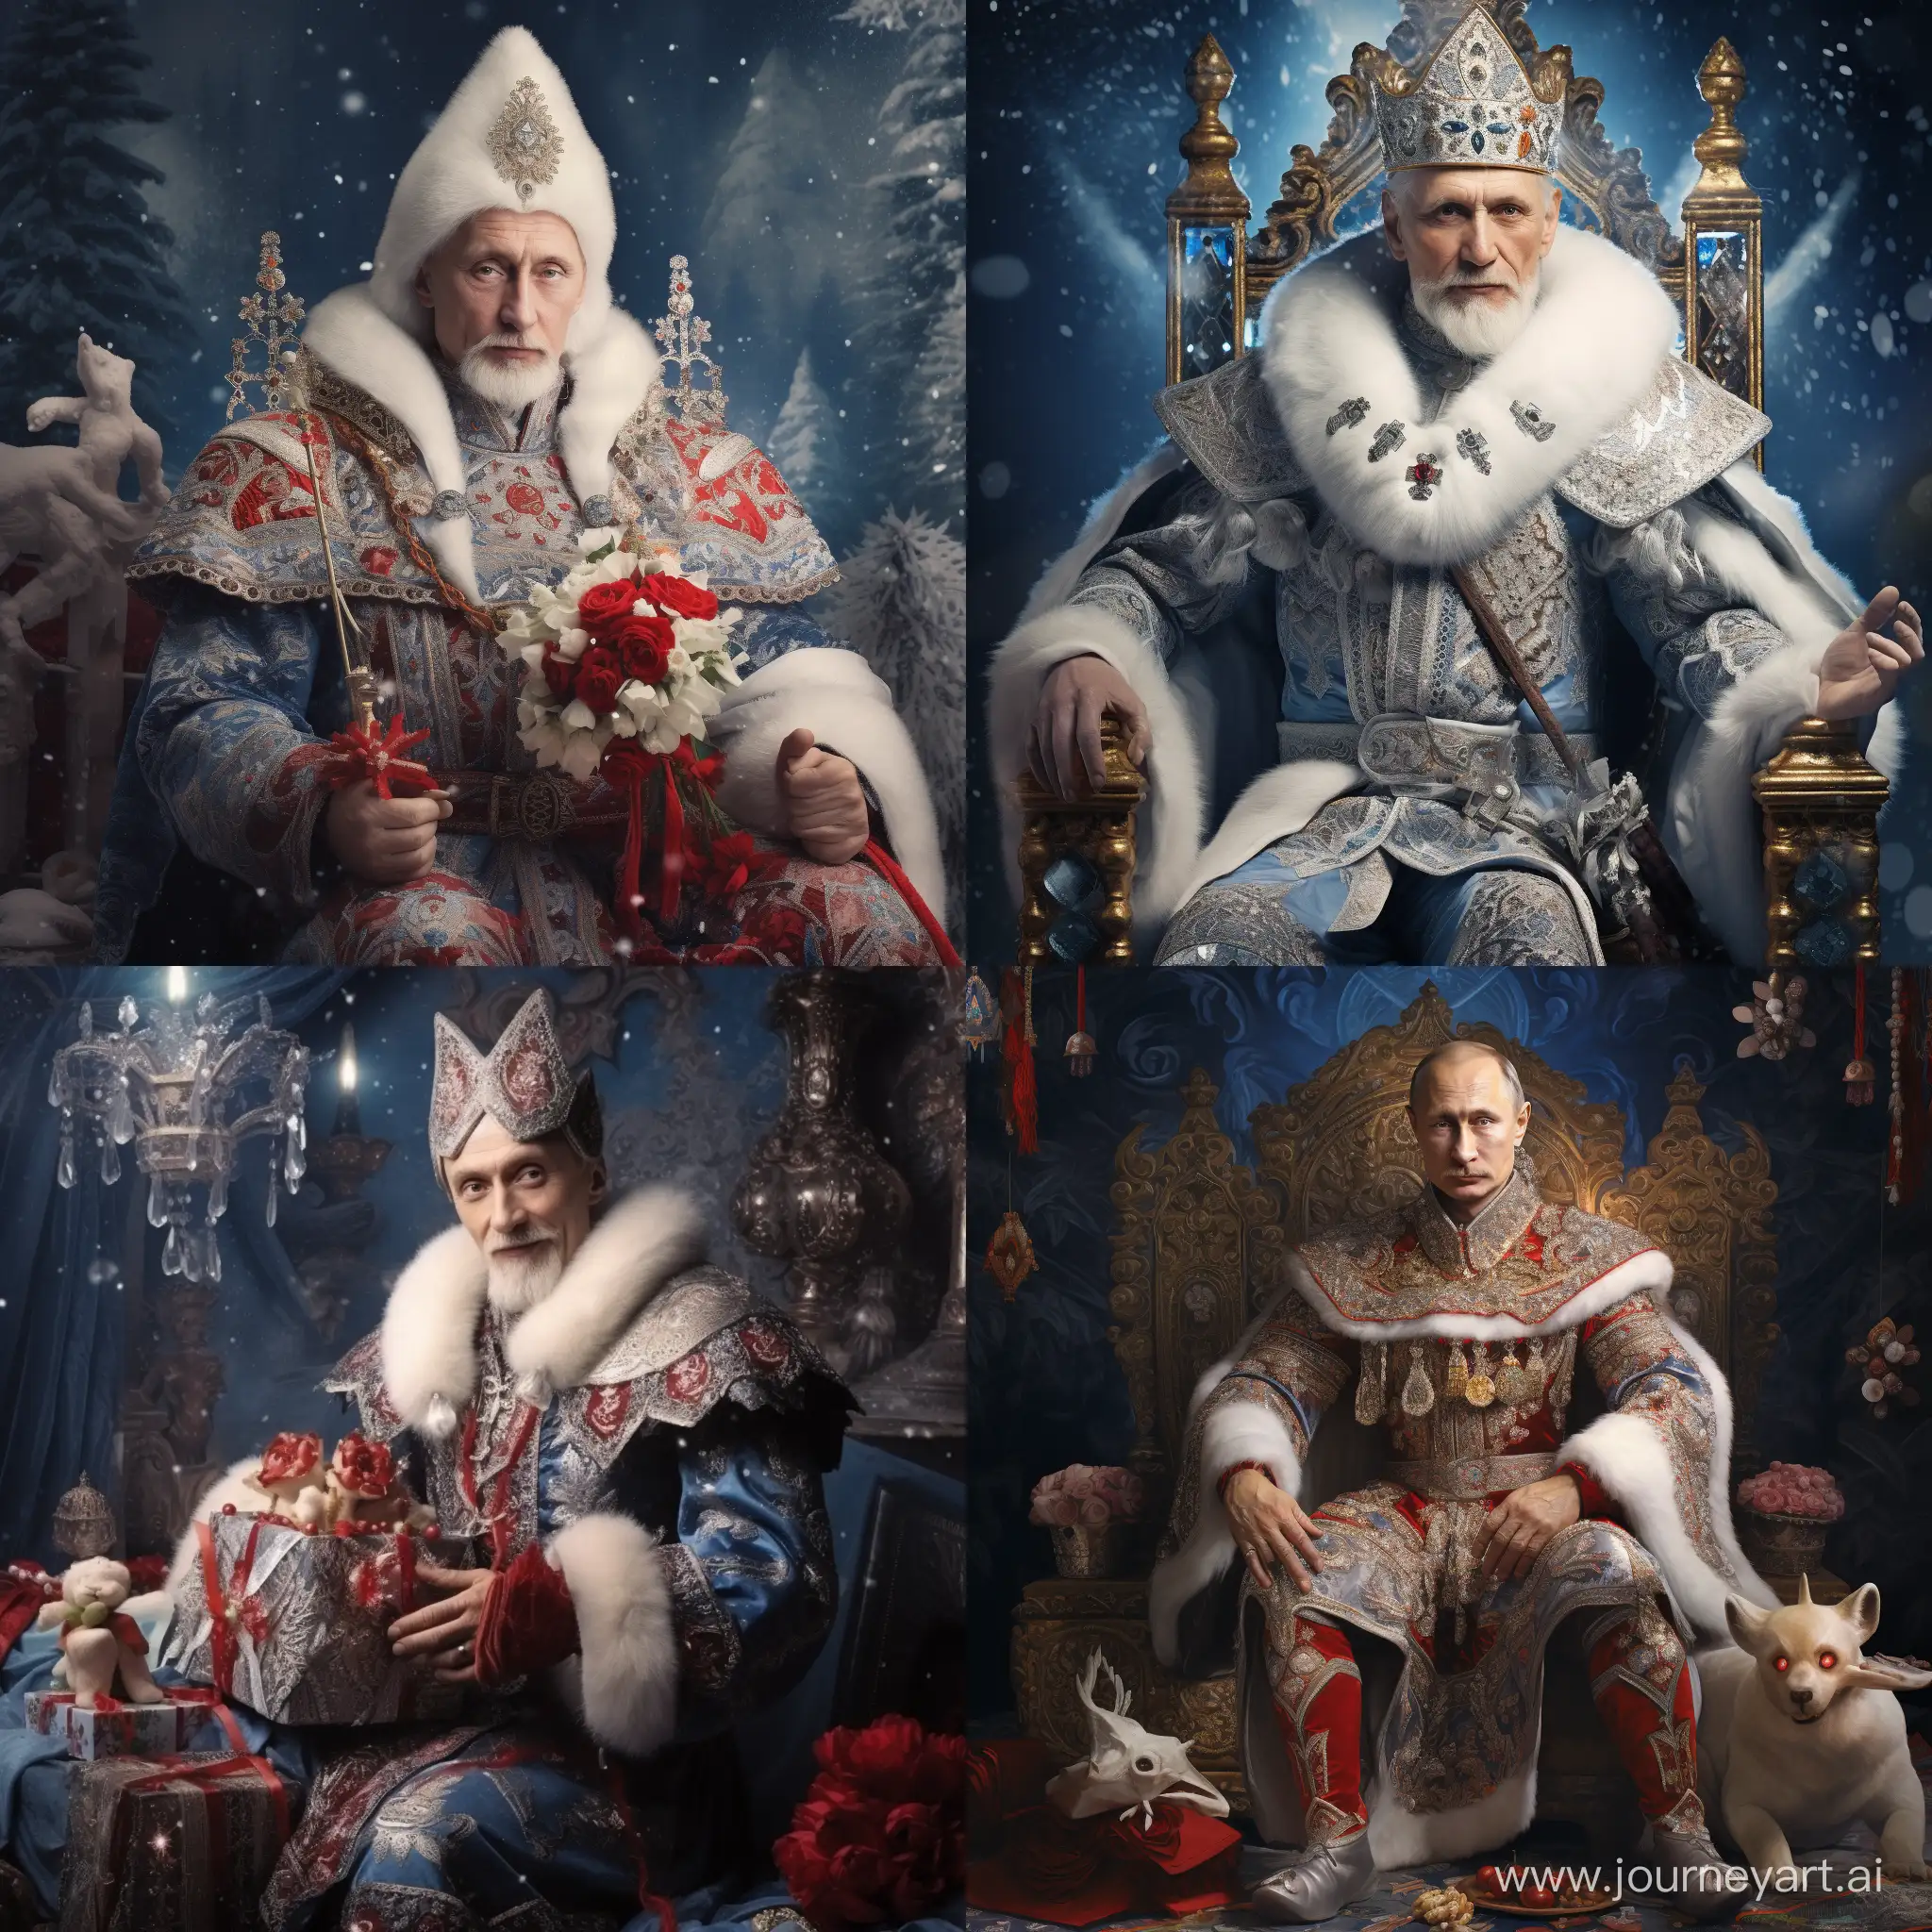 Vladimir-Putin-Portrayed-as-Father-Frost-Distributing-Gifts